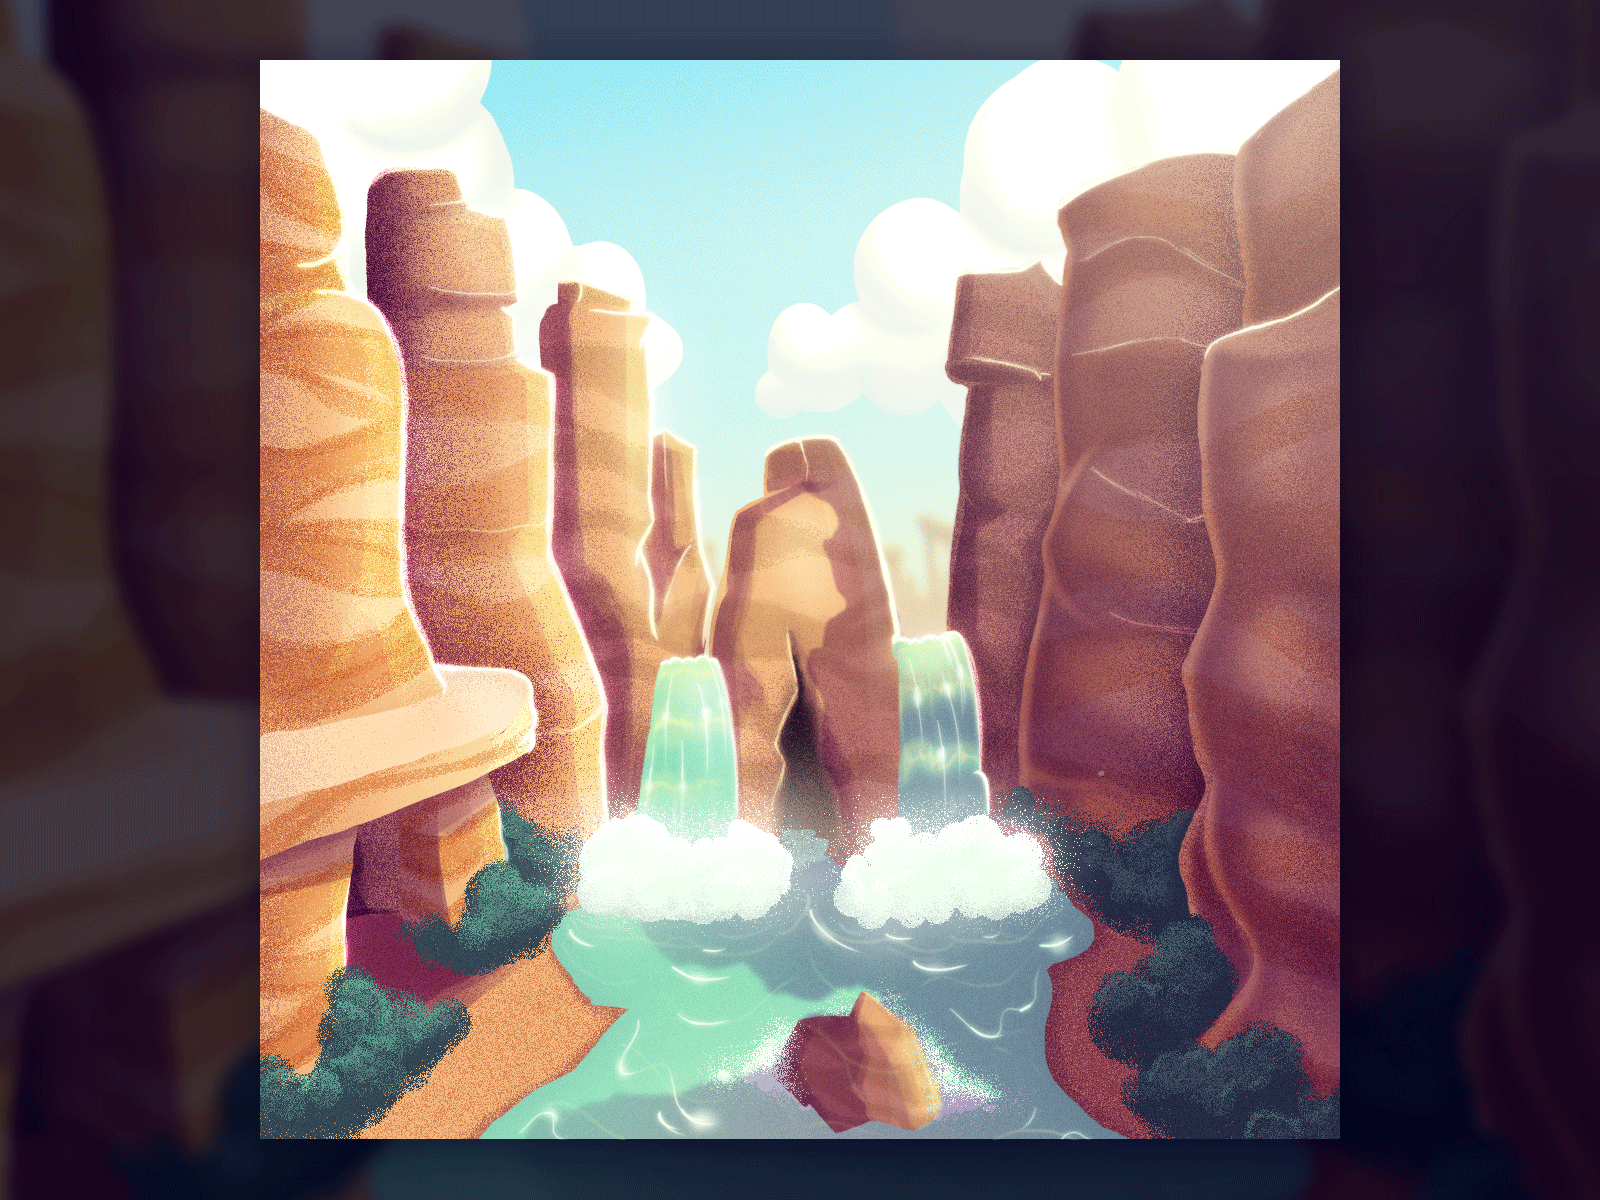 W 36 days of type 36 days of type canyons creative digital art gif illustration photoshop waterfall